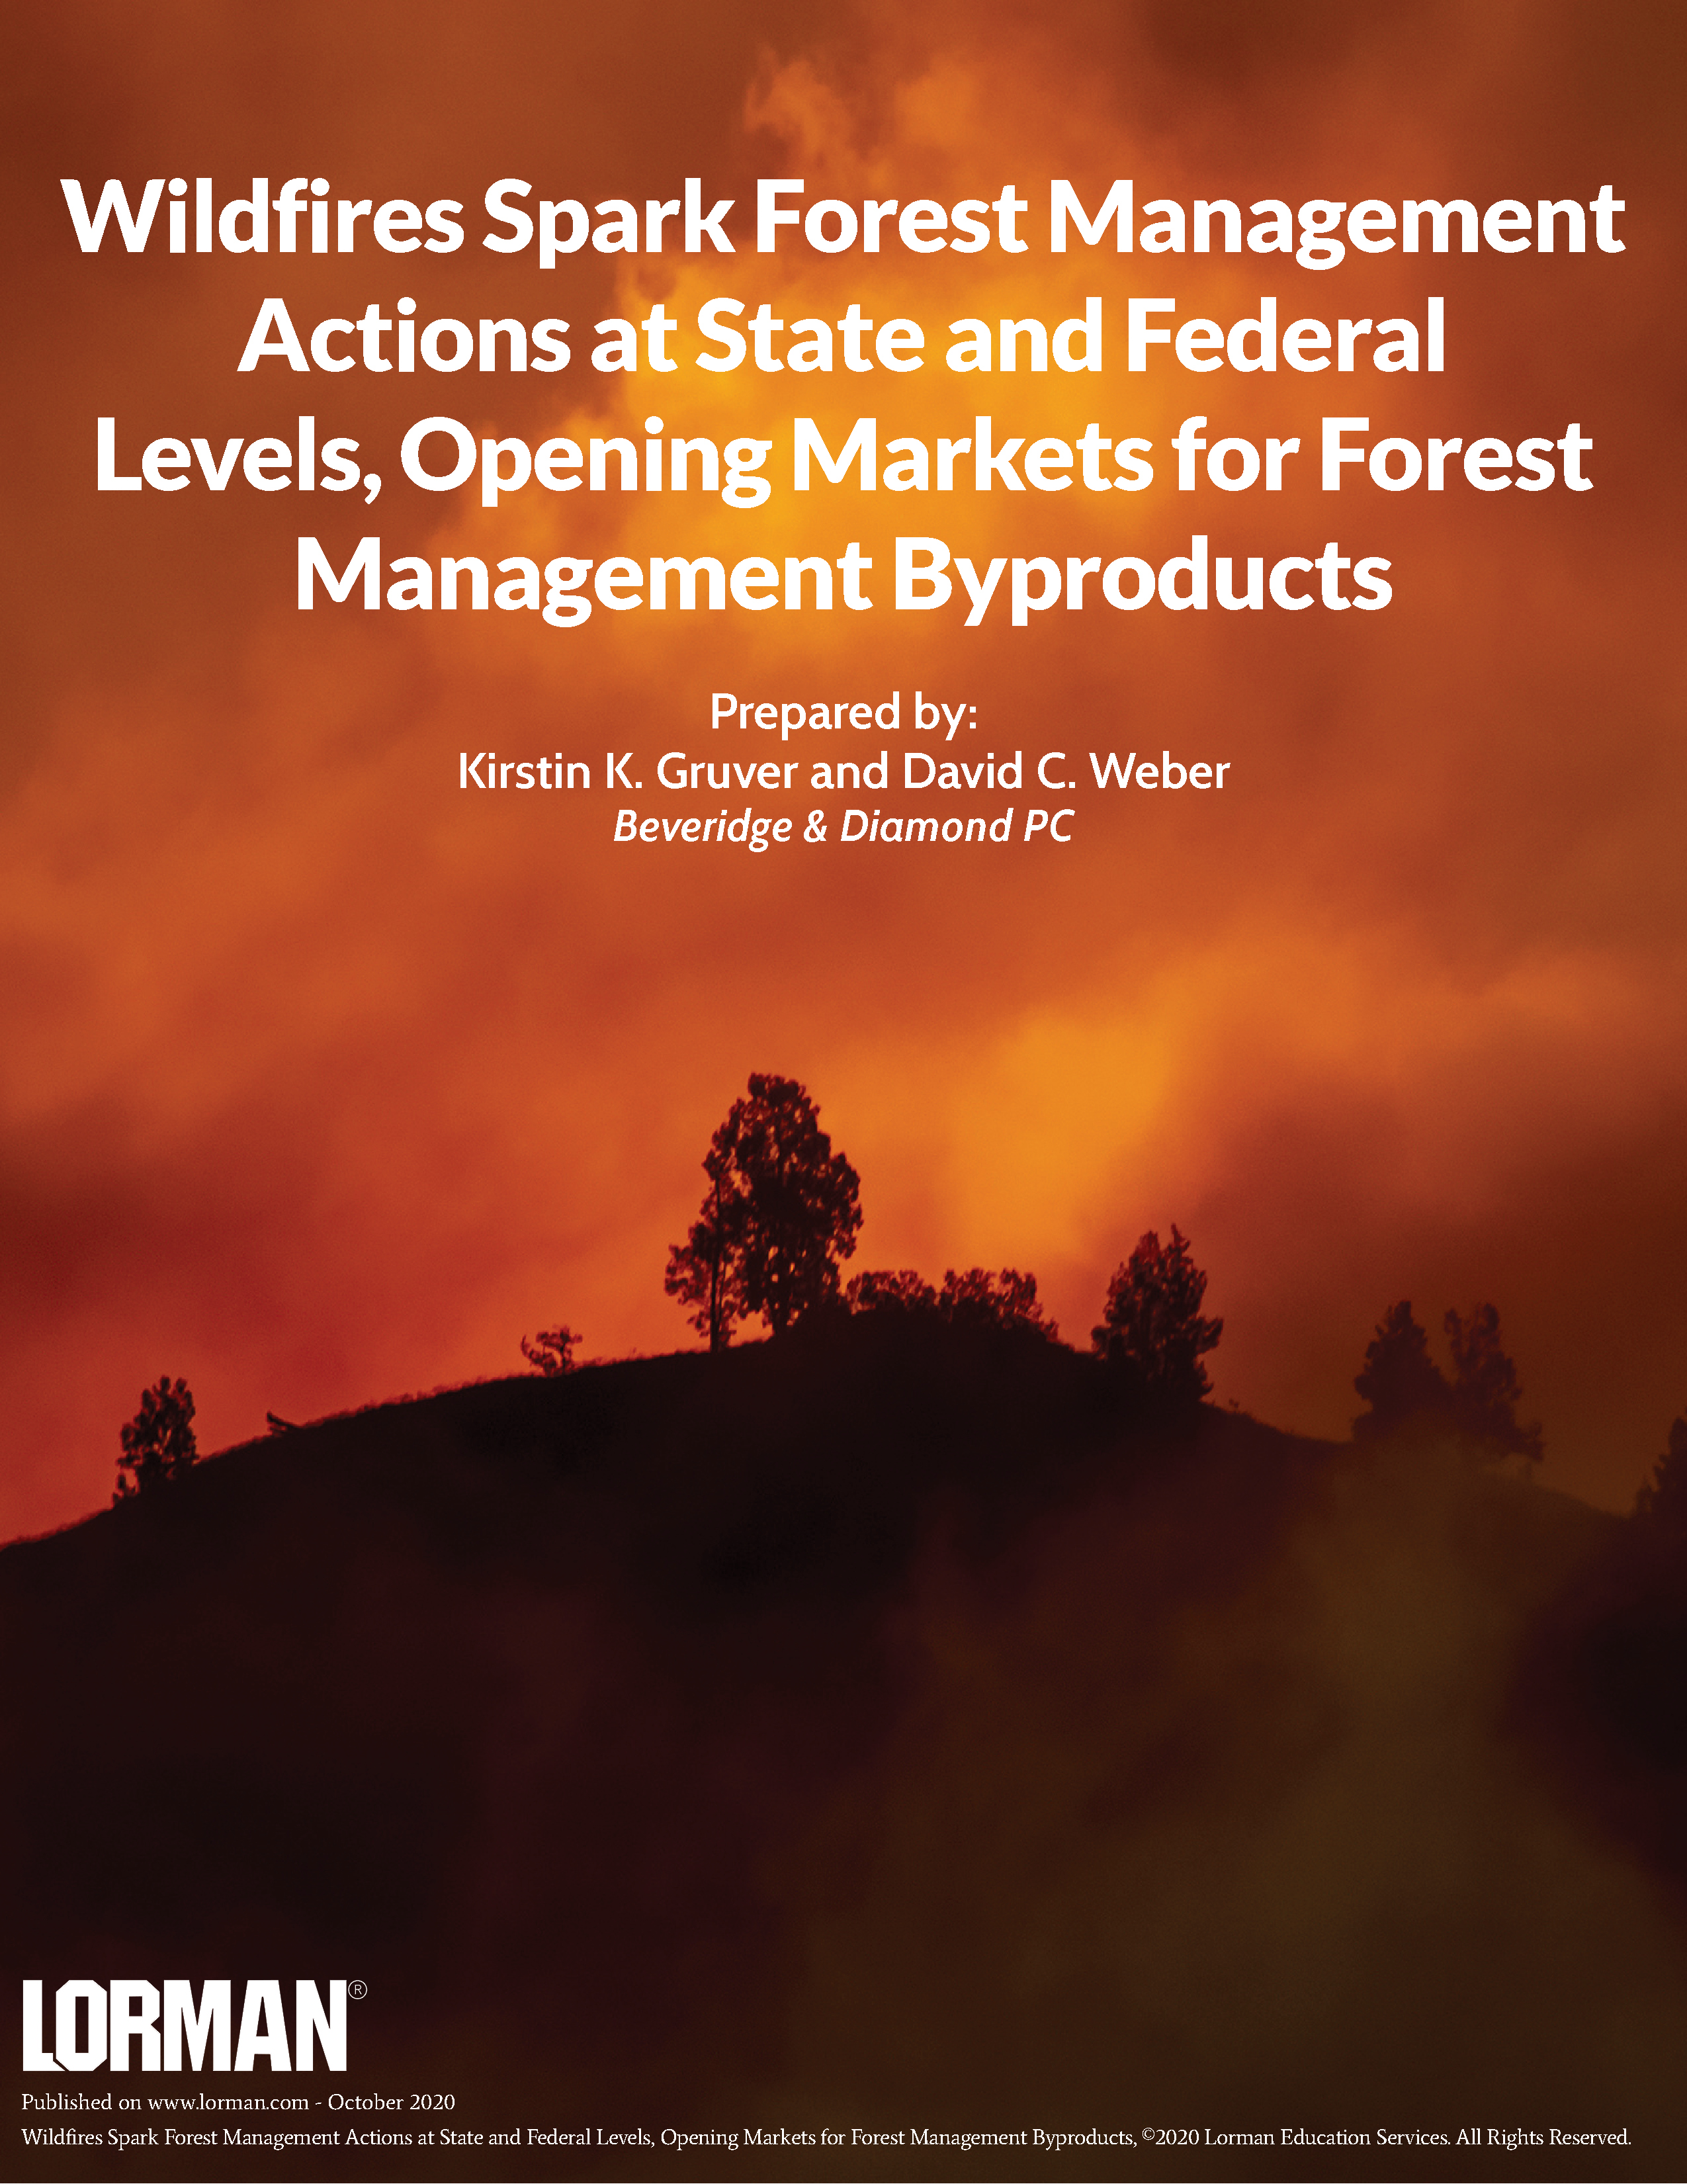 Wildfires Spark Forest Management Actions at State and Federal Levels